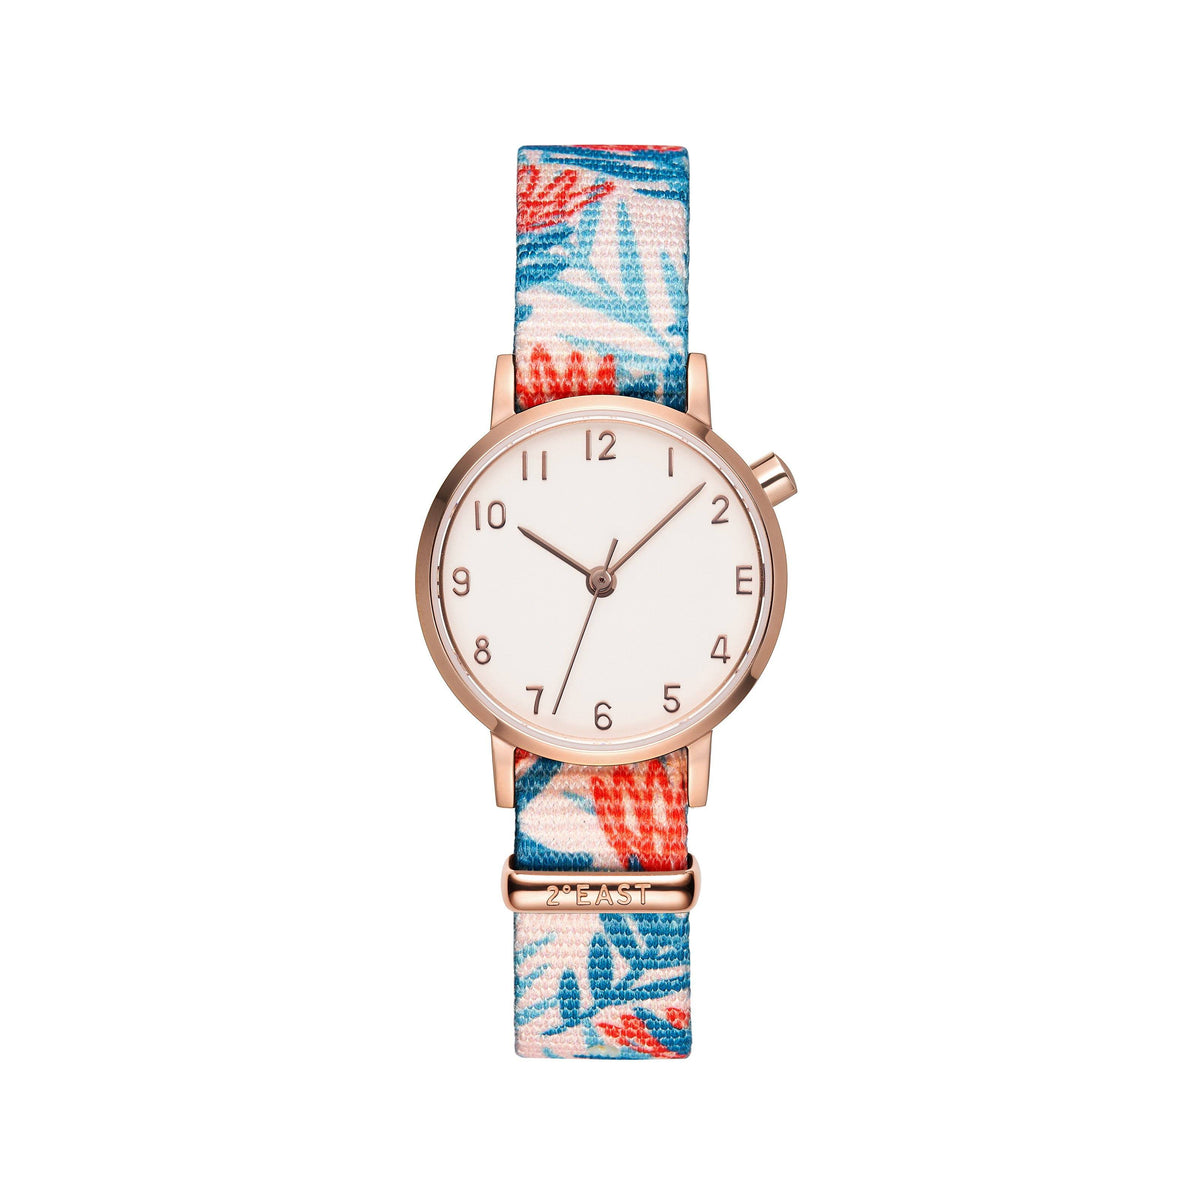 The White and Rose Gold Watch - Protea (Kids)